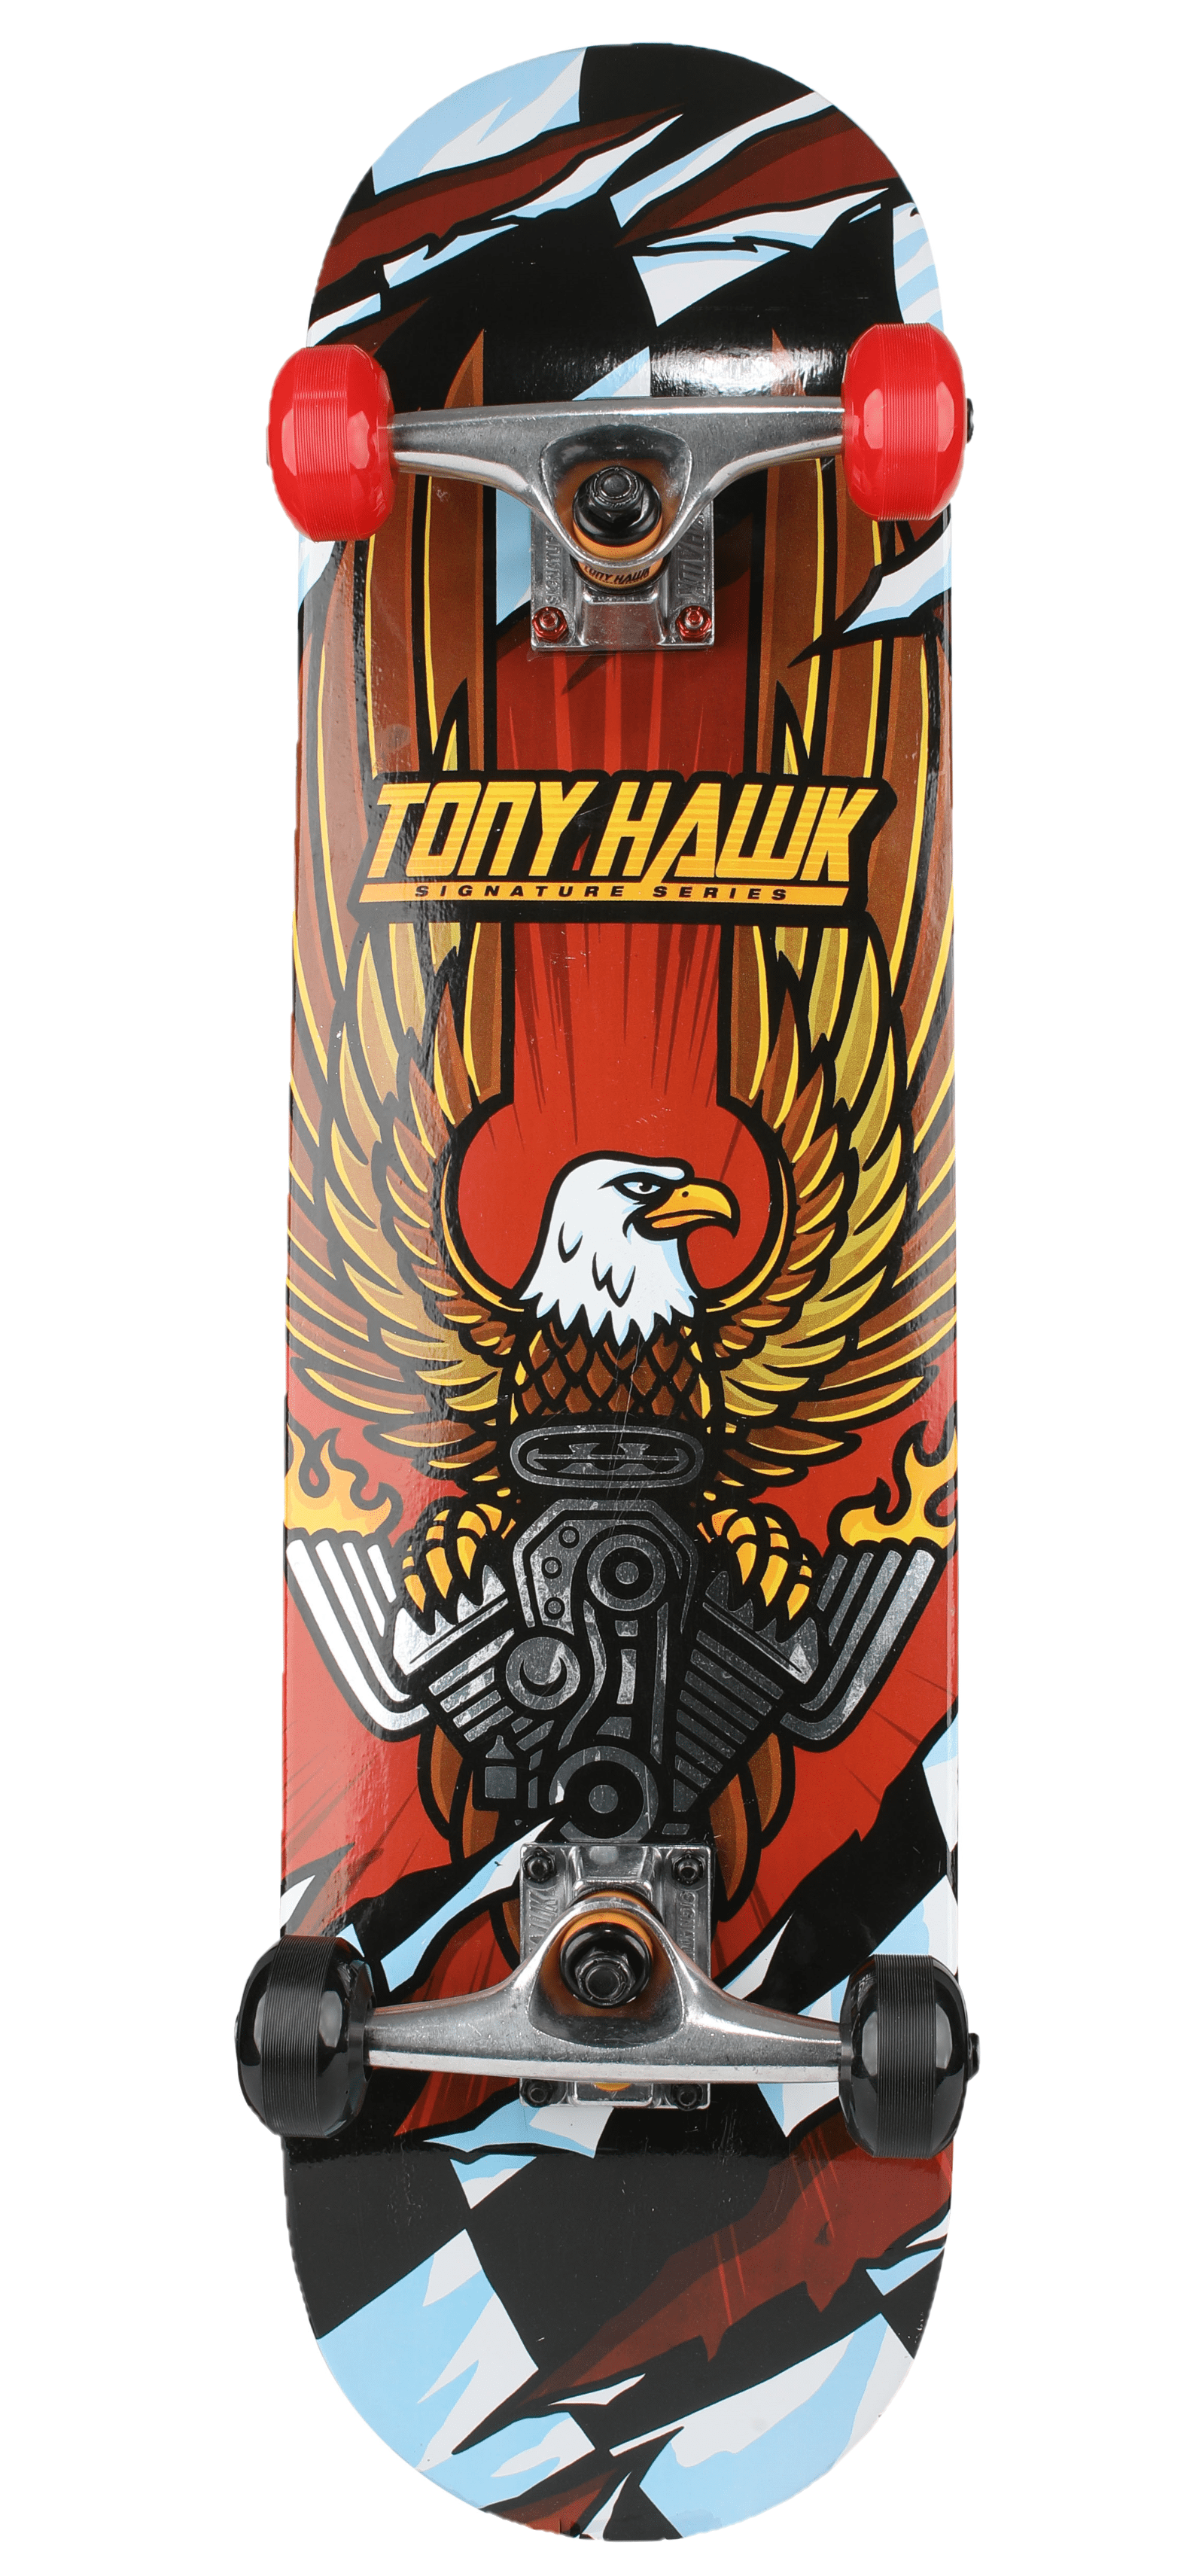 Tony Hawk 31 Popsicle Skateboard with Pro Trucks- Multicolor, Ages 5+,  Full Black Grip Tape, Glossy Wood Finish, 50mmx30mm Colored Wheels with